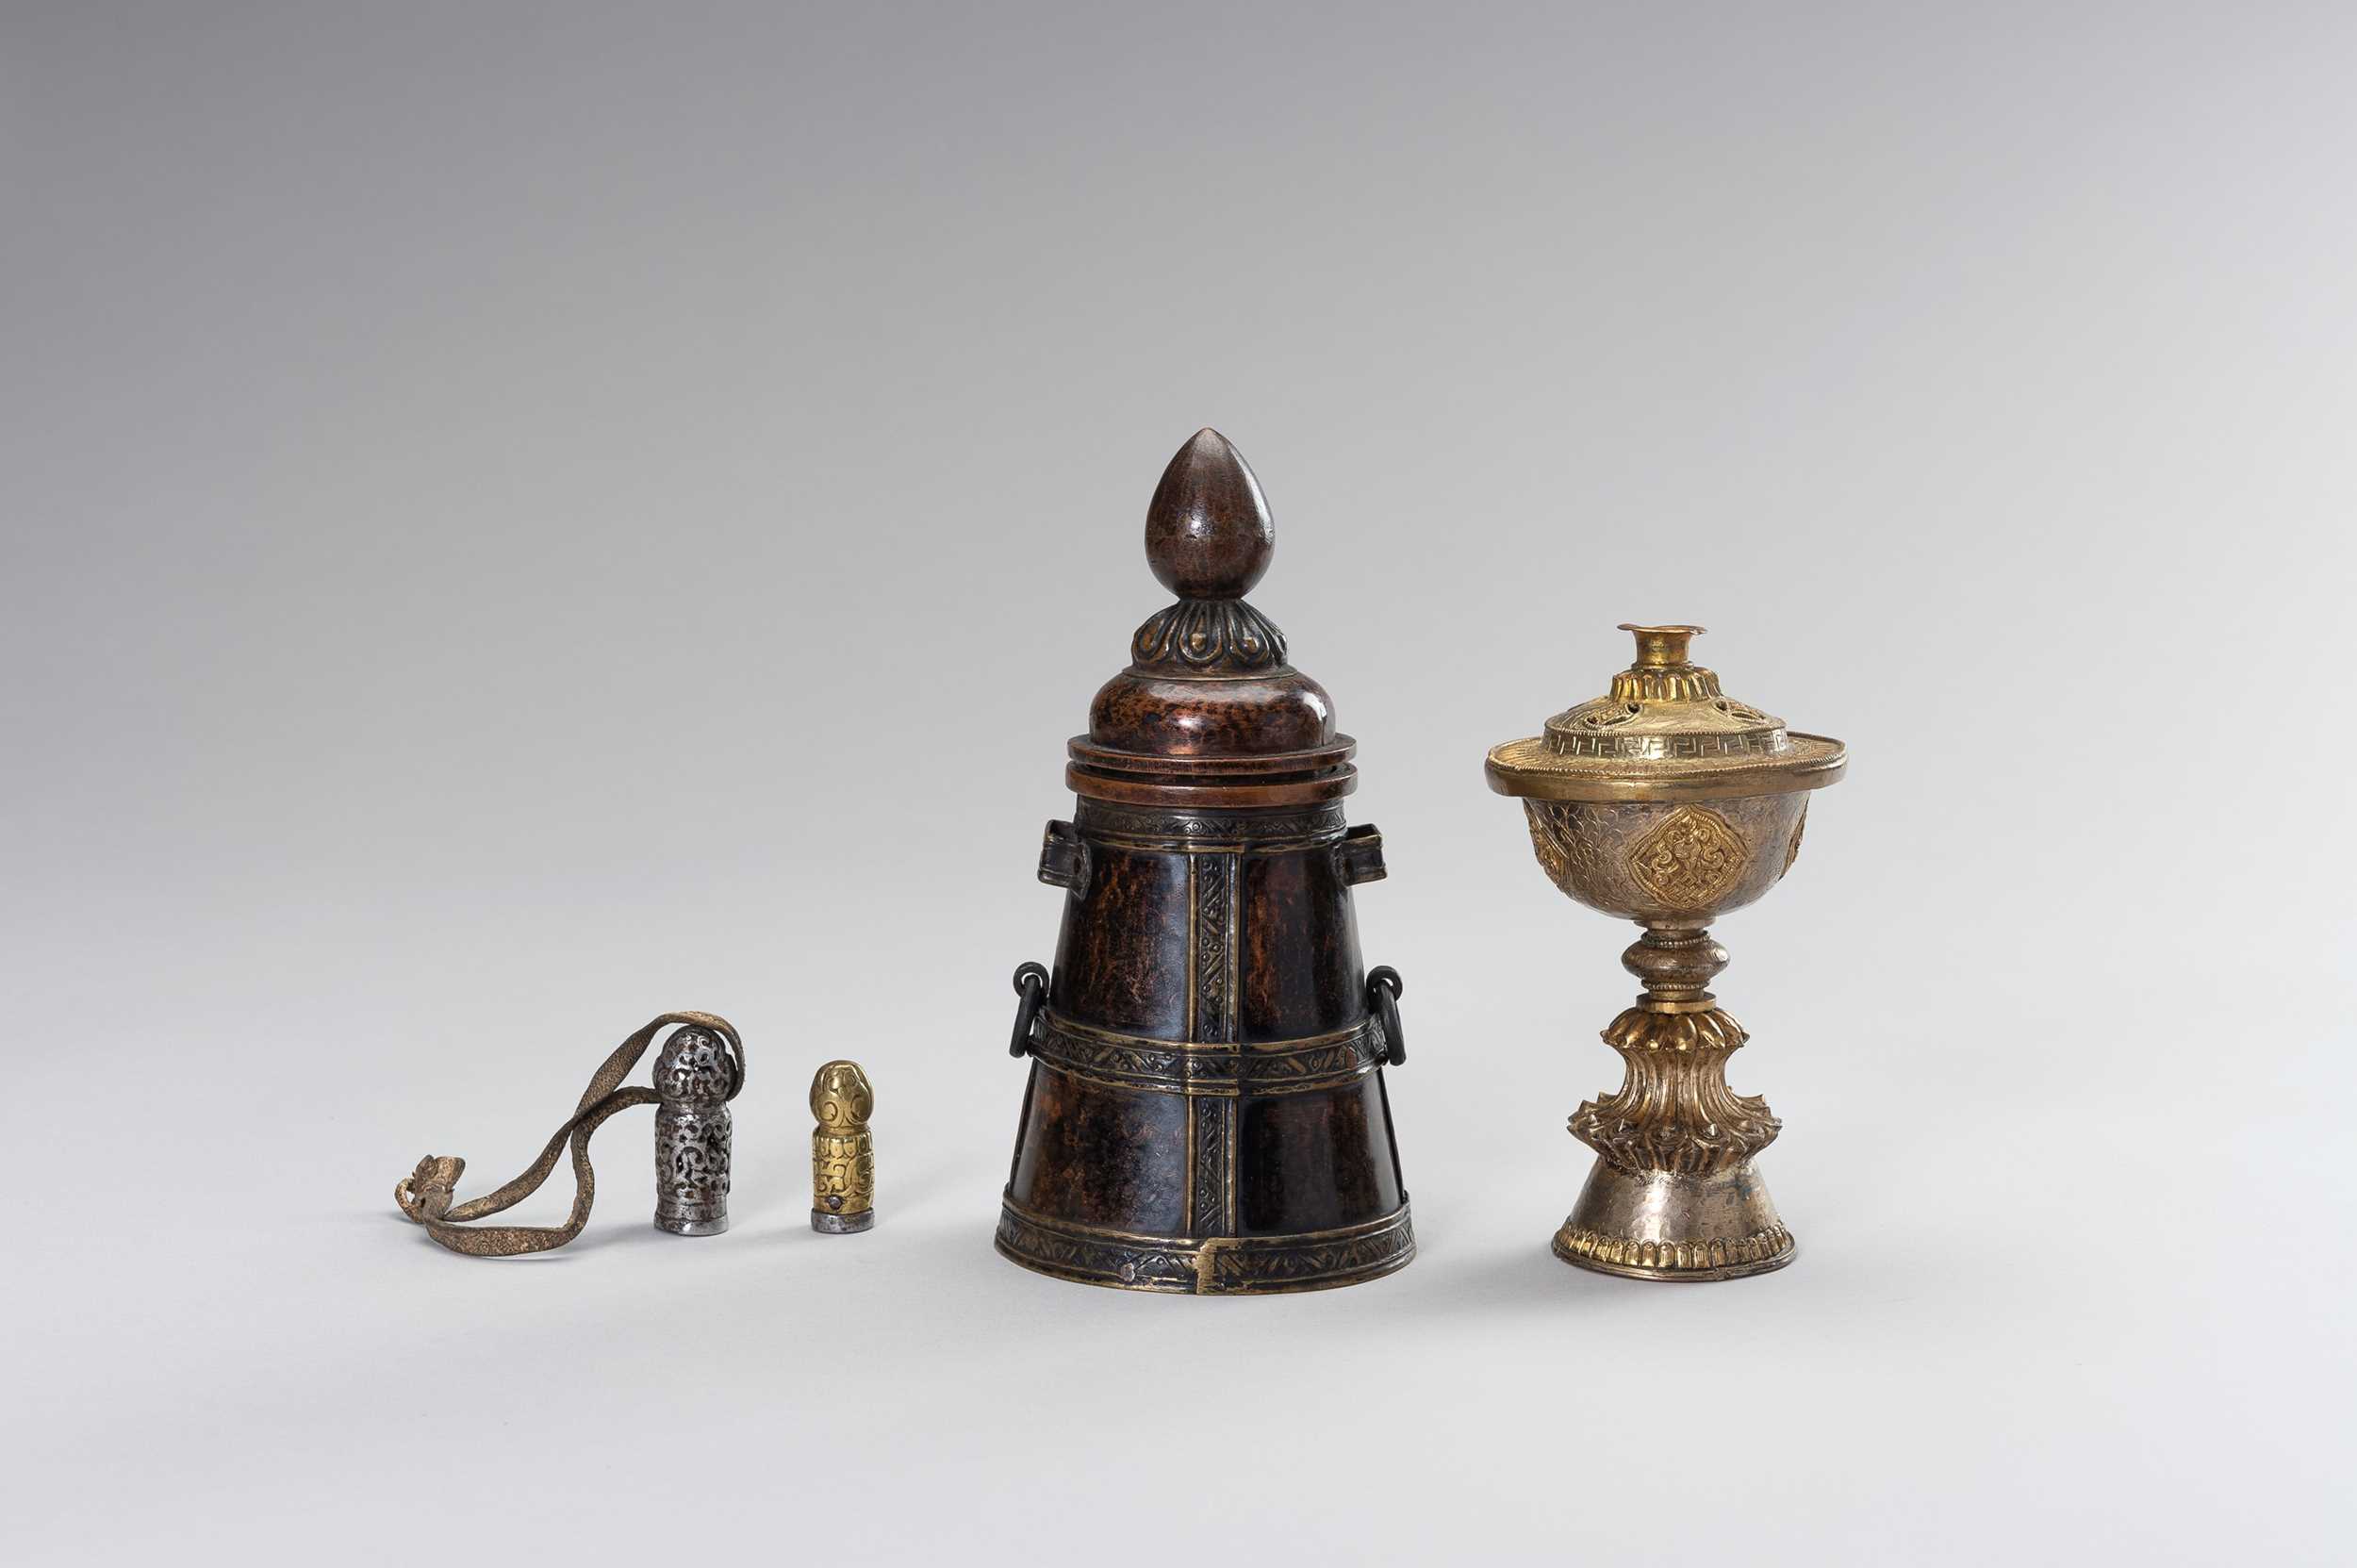 Lot 73 - A GROUP OF TWO SEALS, A TSAMPA VESSEL AND A BUTTER LAMP